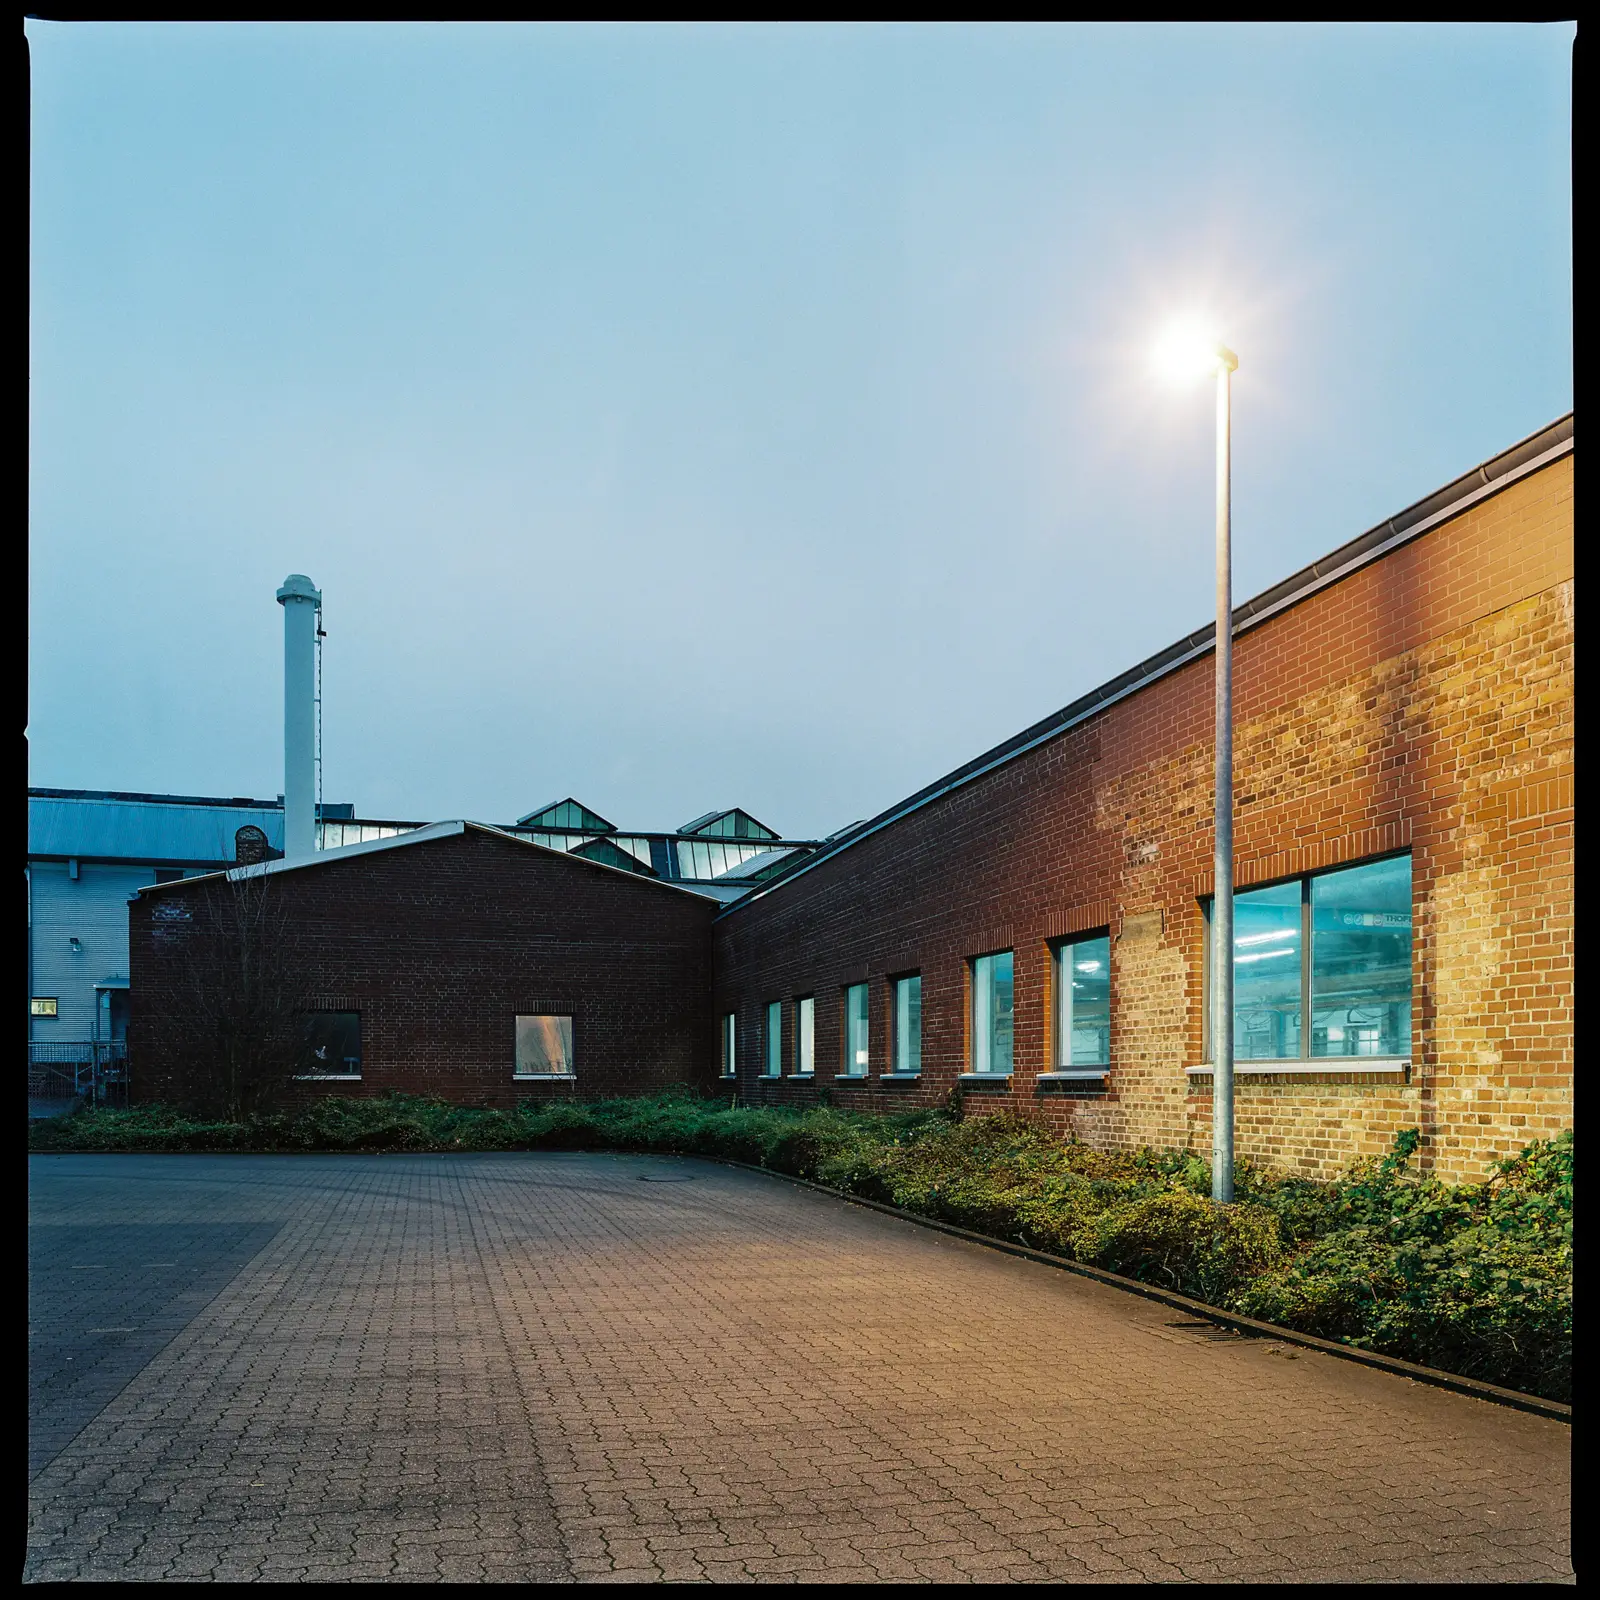 6x6 photograph of a run-down factory building at dusk, with parking spaces in the foreground